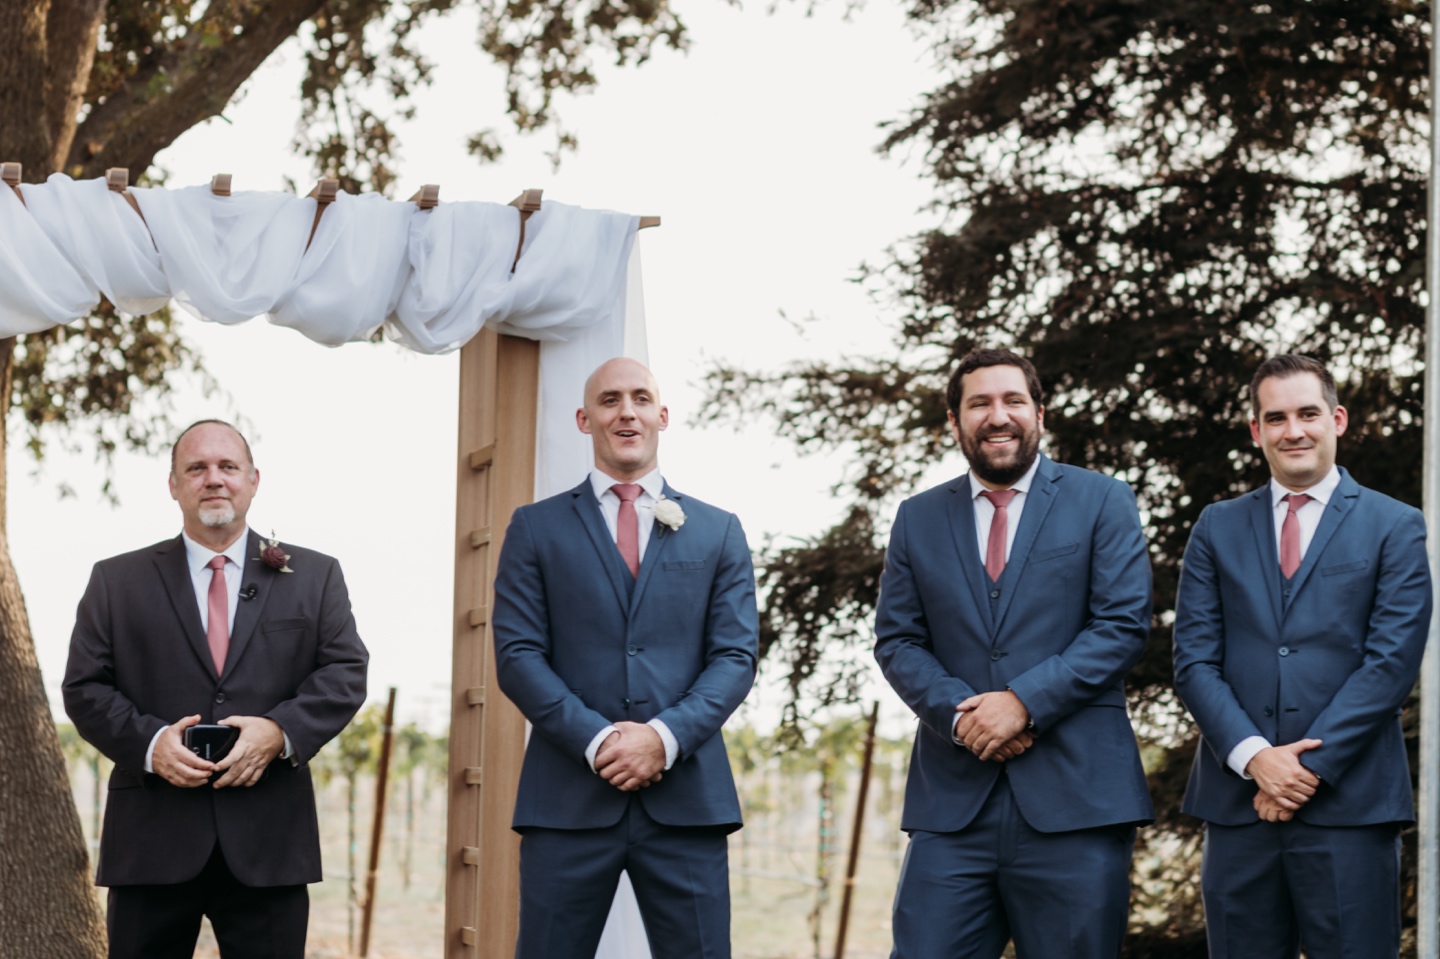 Groom and groomsmen stand at the altar with the officiant and smile big! Wedding photography in Sacramento by Liz Koston.